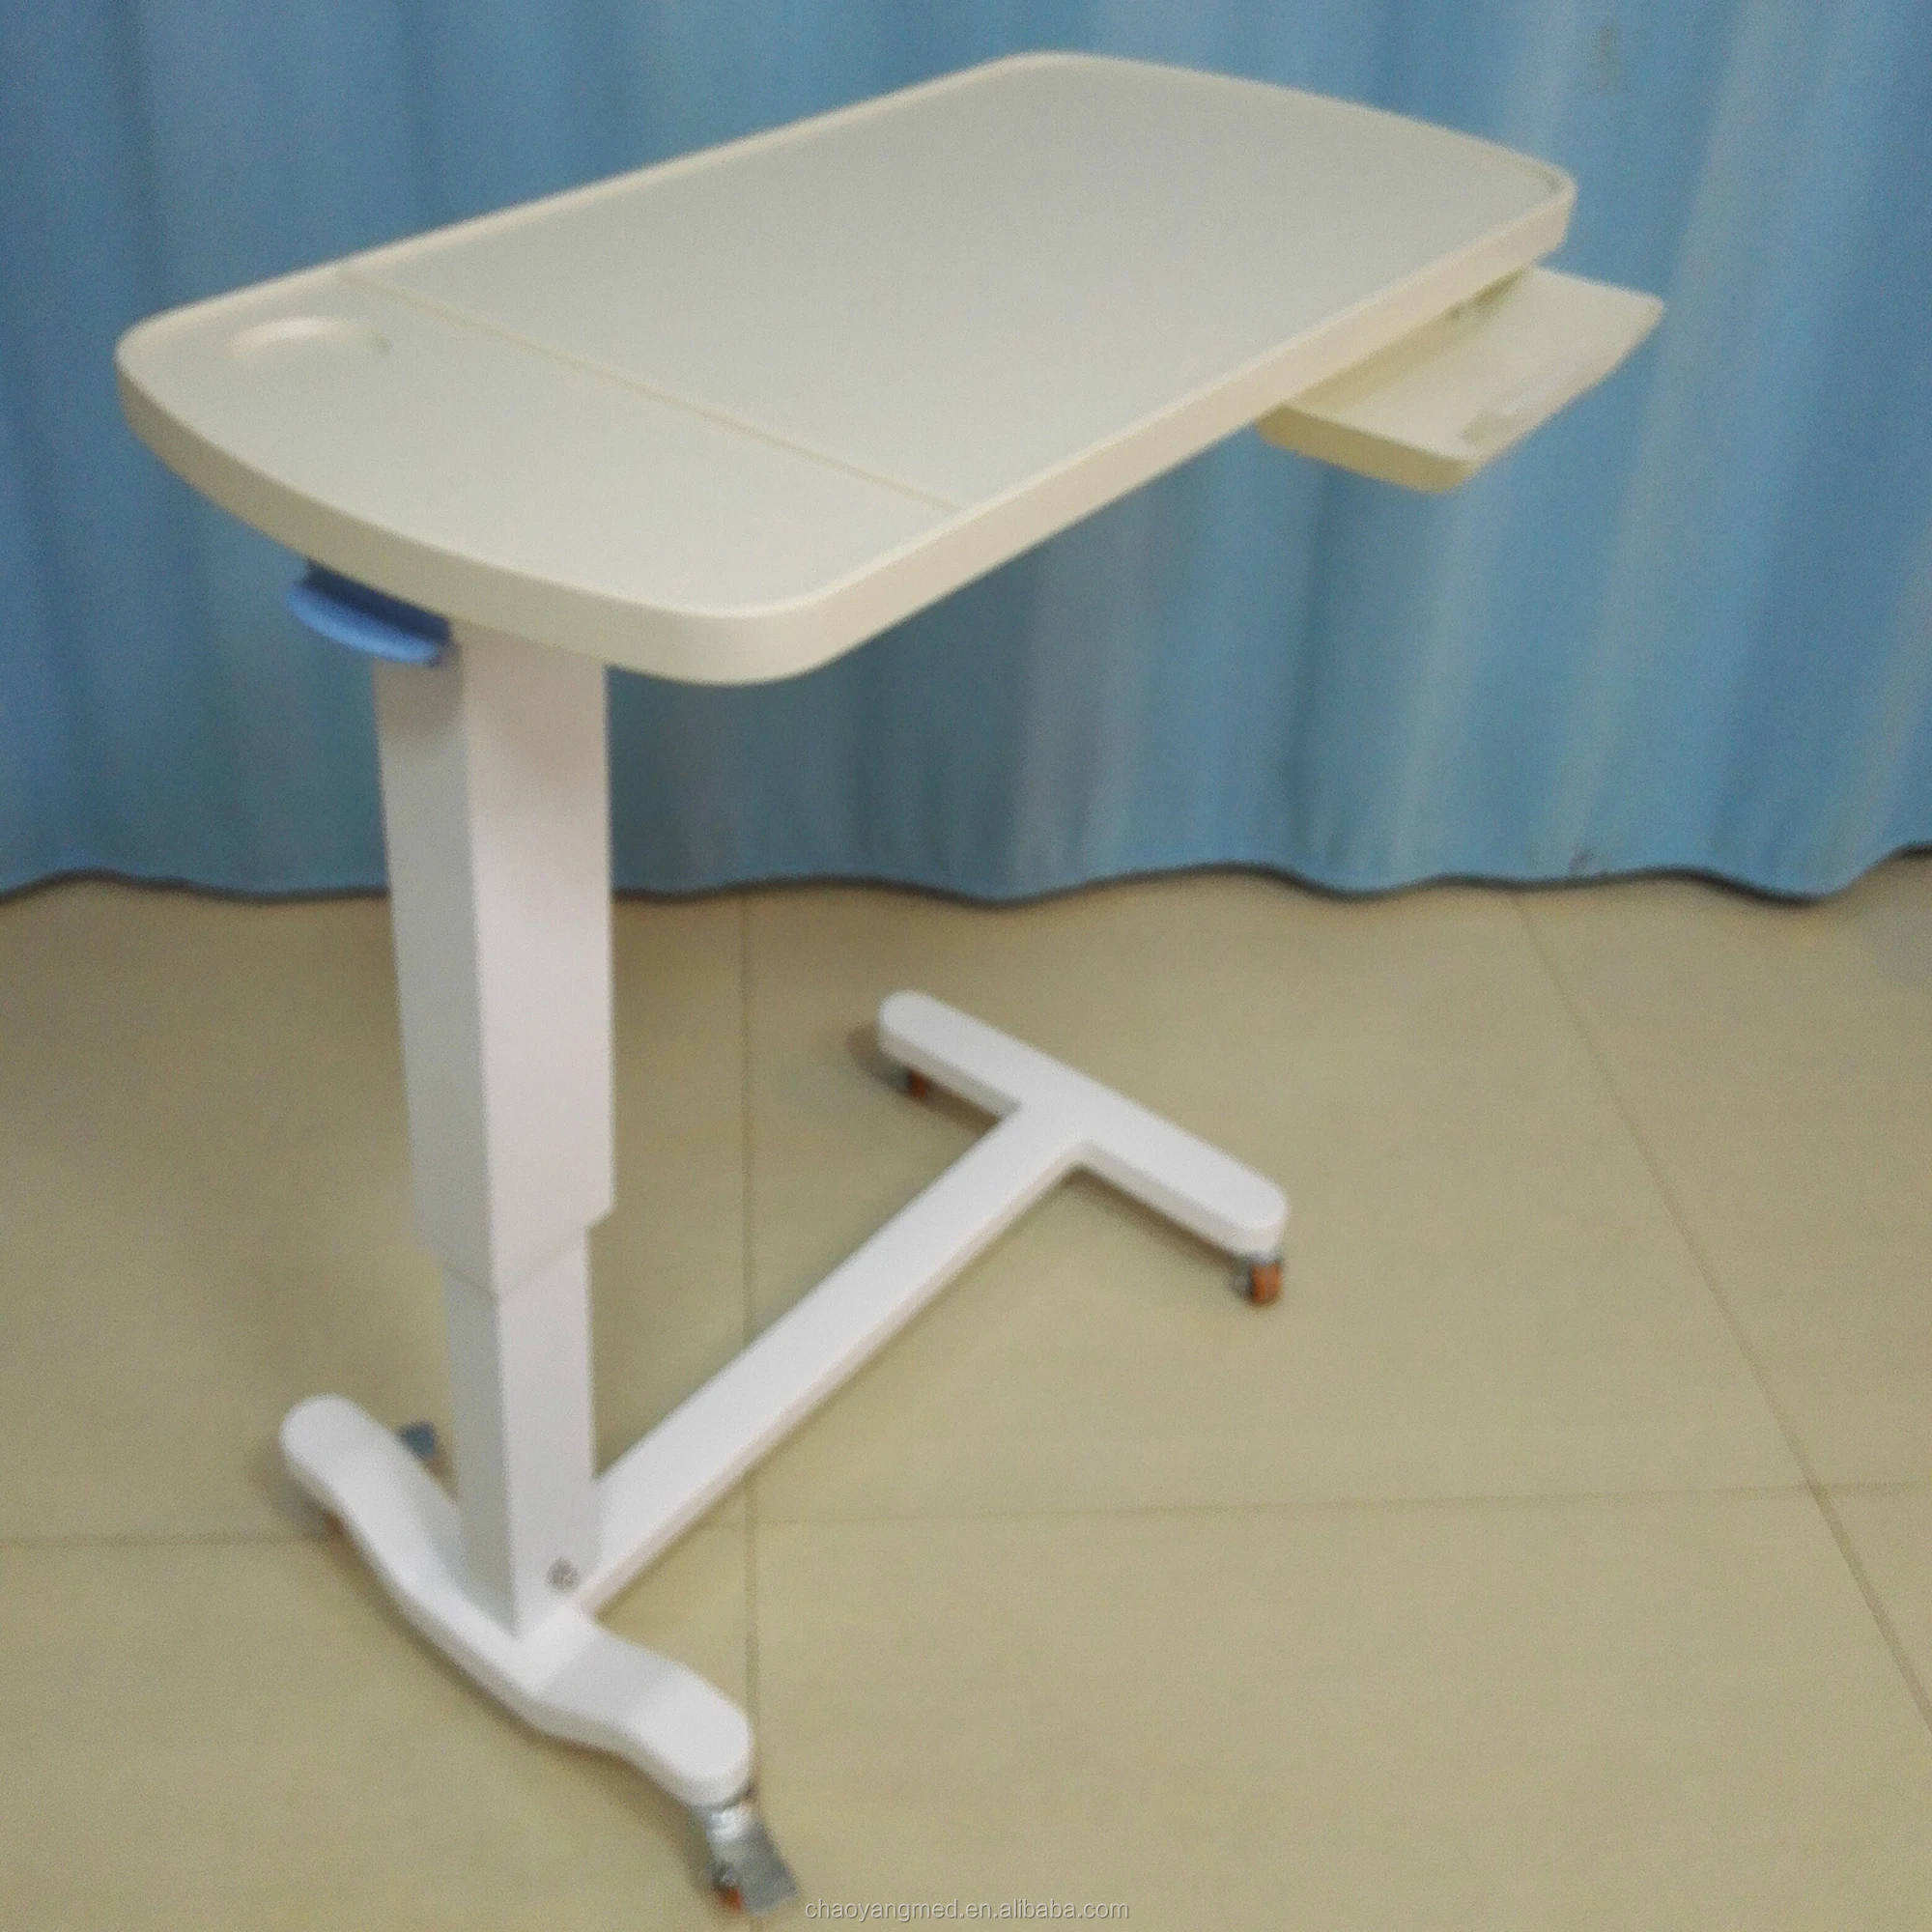 Adjustable Plastic Hospital Bed Tray With Drawer Cyh815b Buy